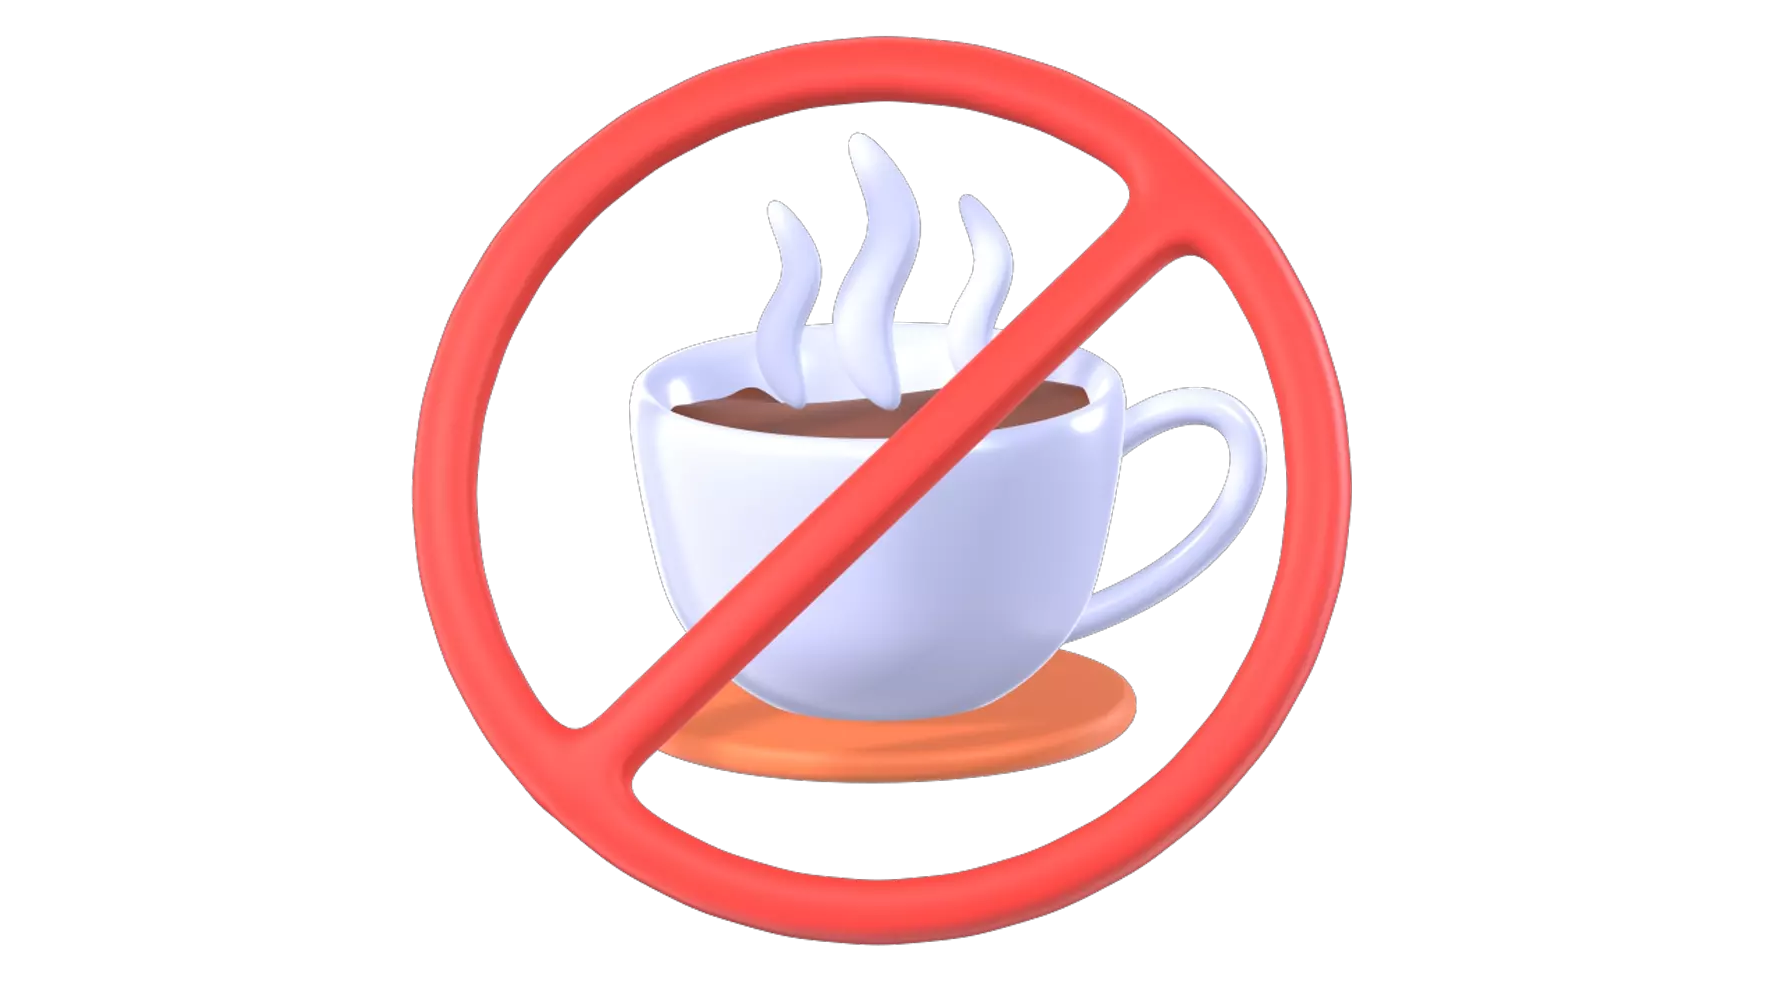 No Drink 3D Graphic